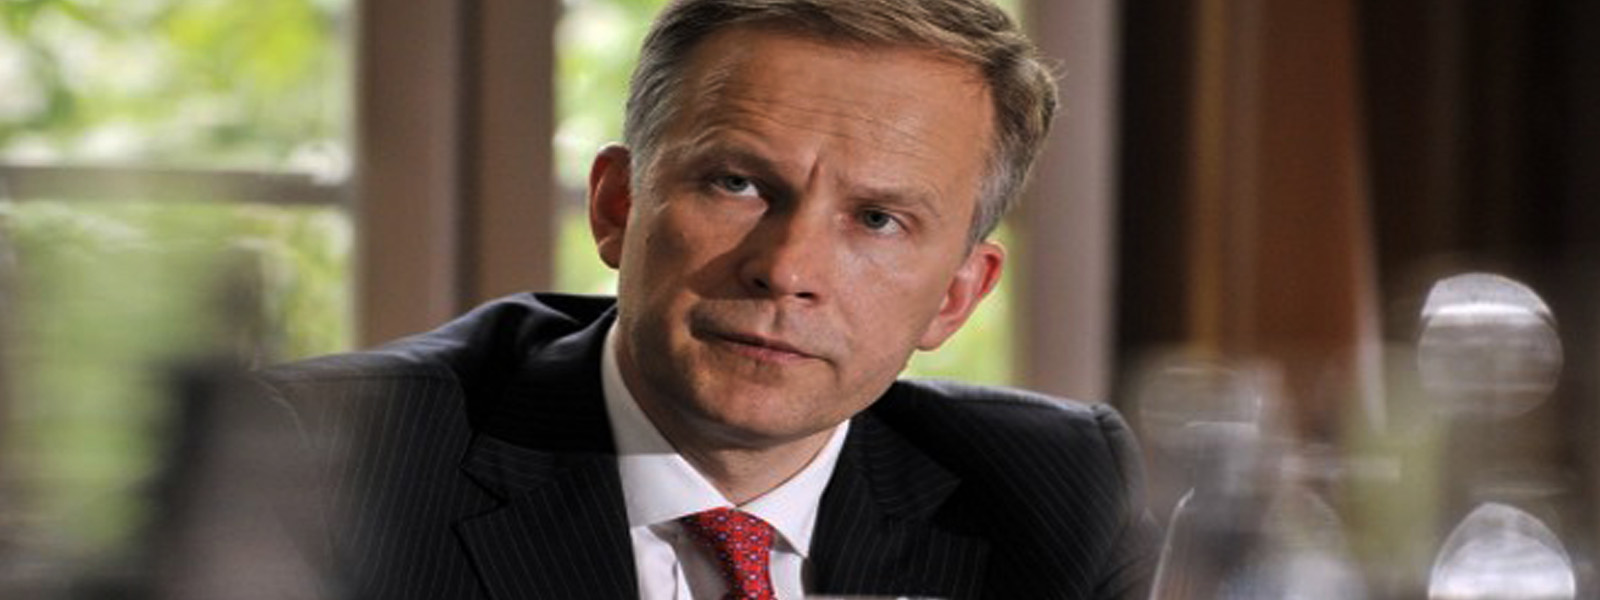 Latvian central bank governor detained in financial probe